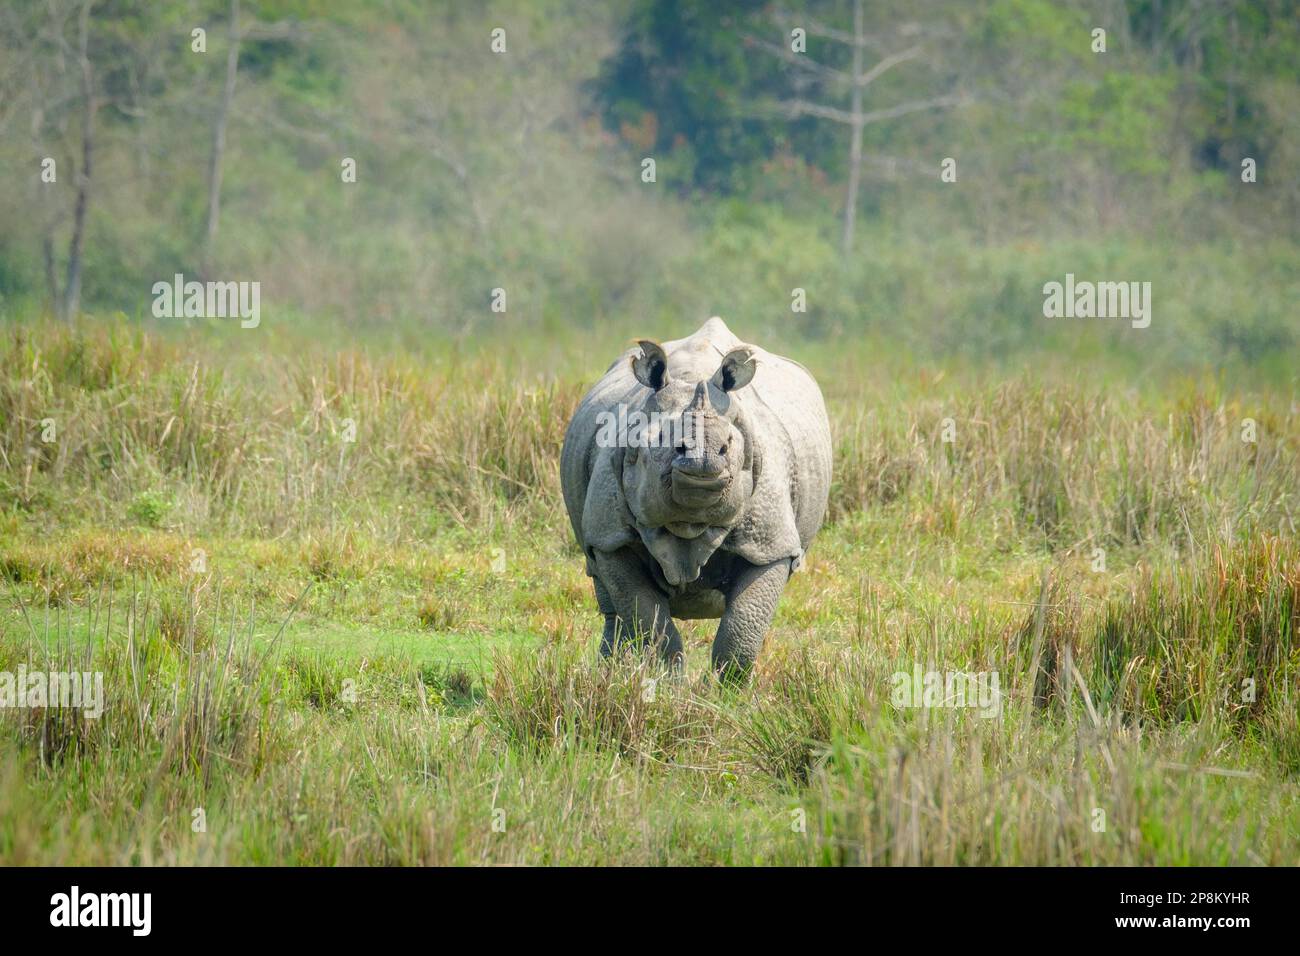 Great Indian Rhino, Rhinoceros unicornis, stands proudly in grassland cautiously observing for tigers. Kaziranga National Park, Assam, India Stock Photo